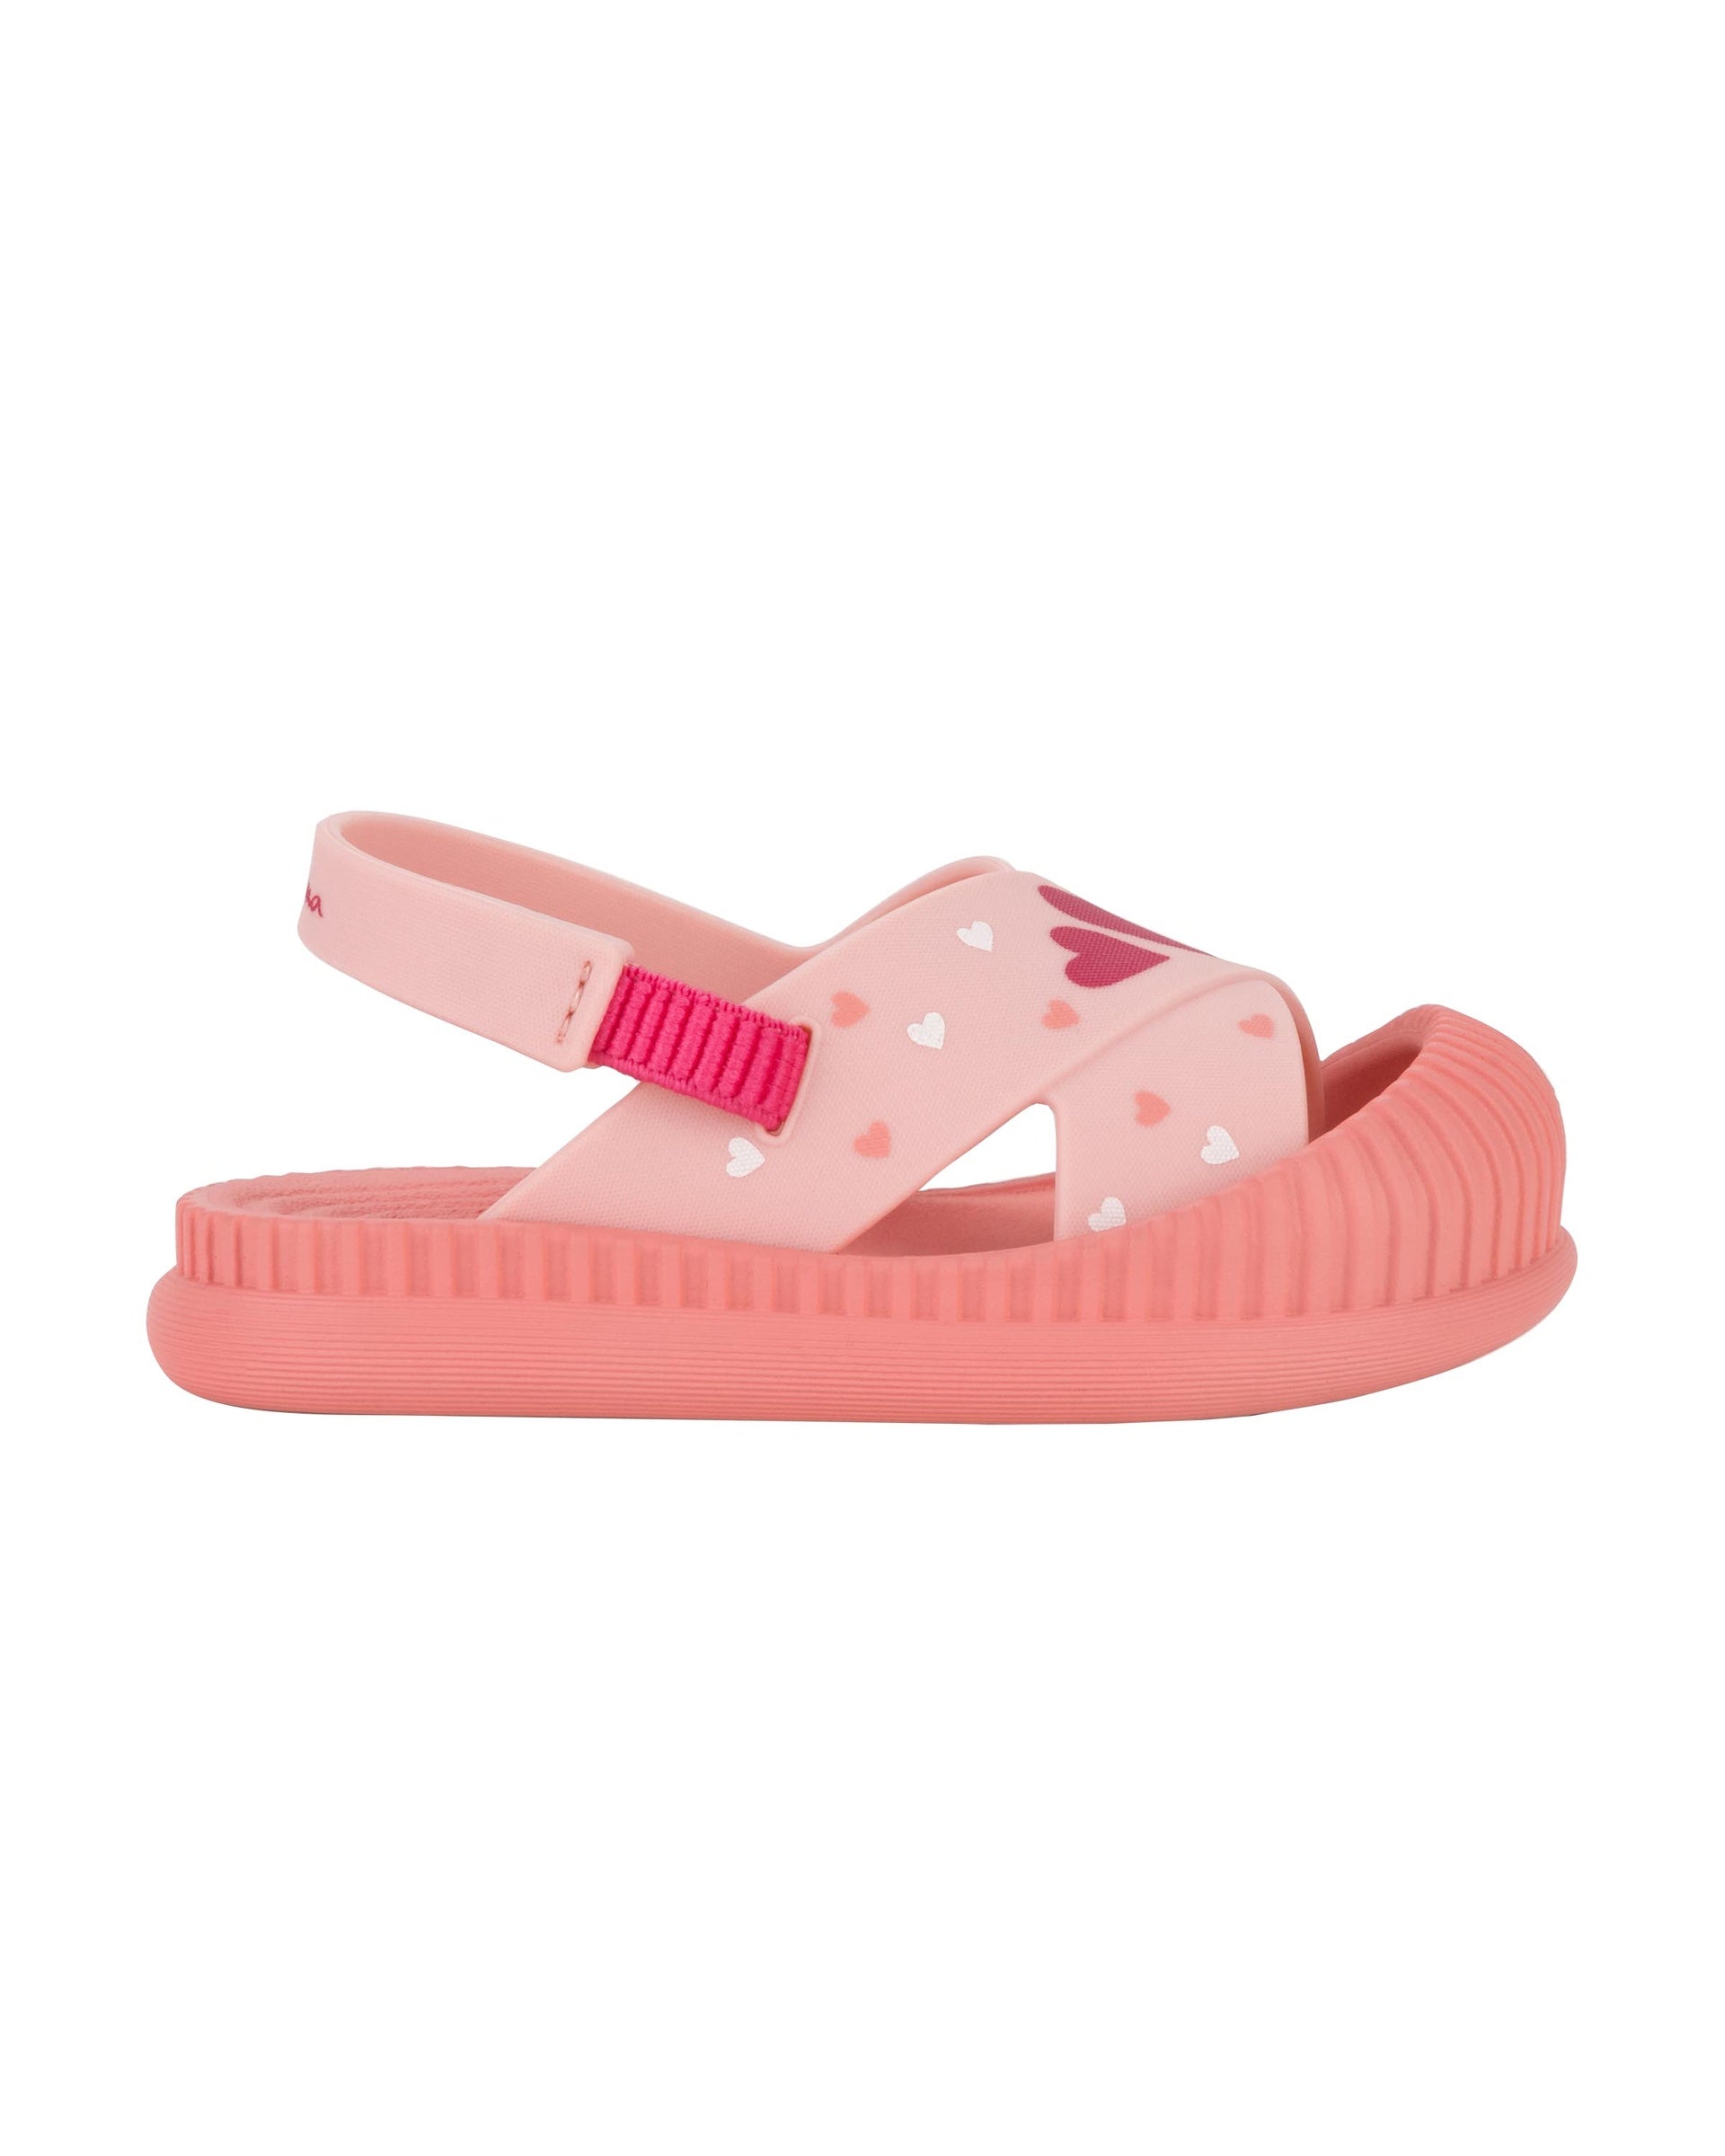 Outer side view of a pink Ipanema Cute baby sandal with hearts on the strap.